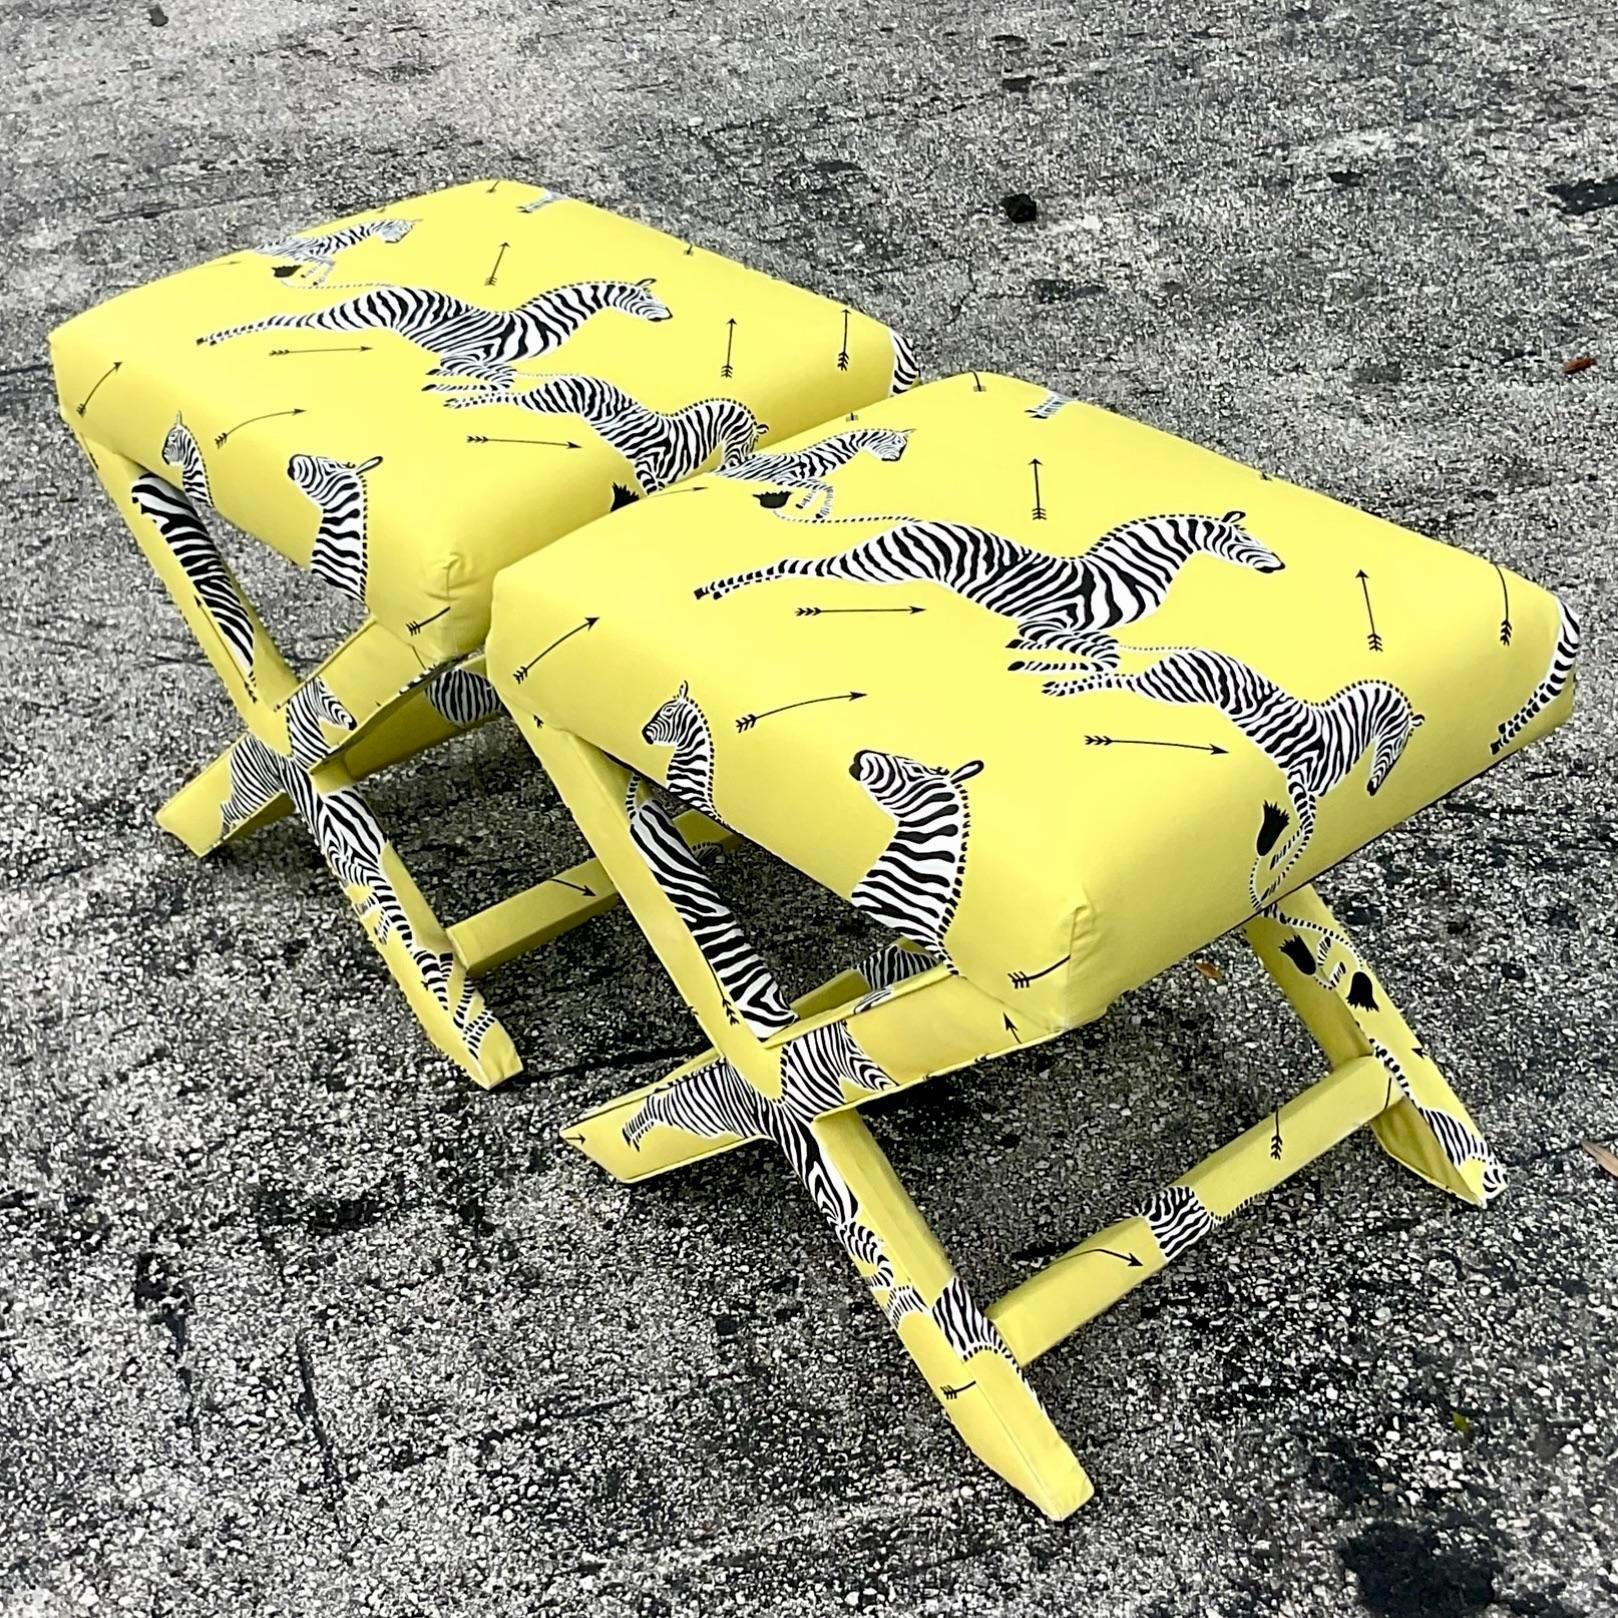 A stunning pair of vintage Regency X-benches. A classic shape upholstered in an homage to Scalamandre’s iconic Maasai print. Acquired from a Palm Beach estate.